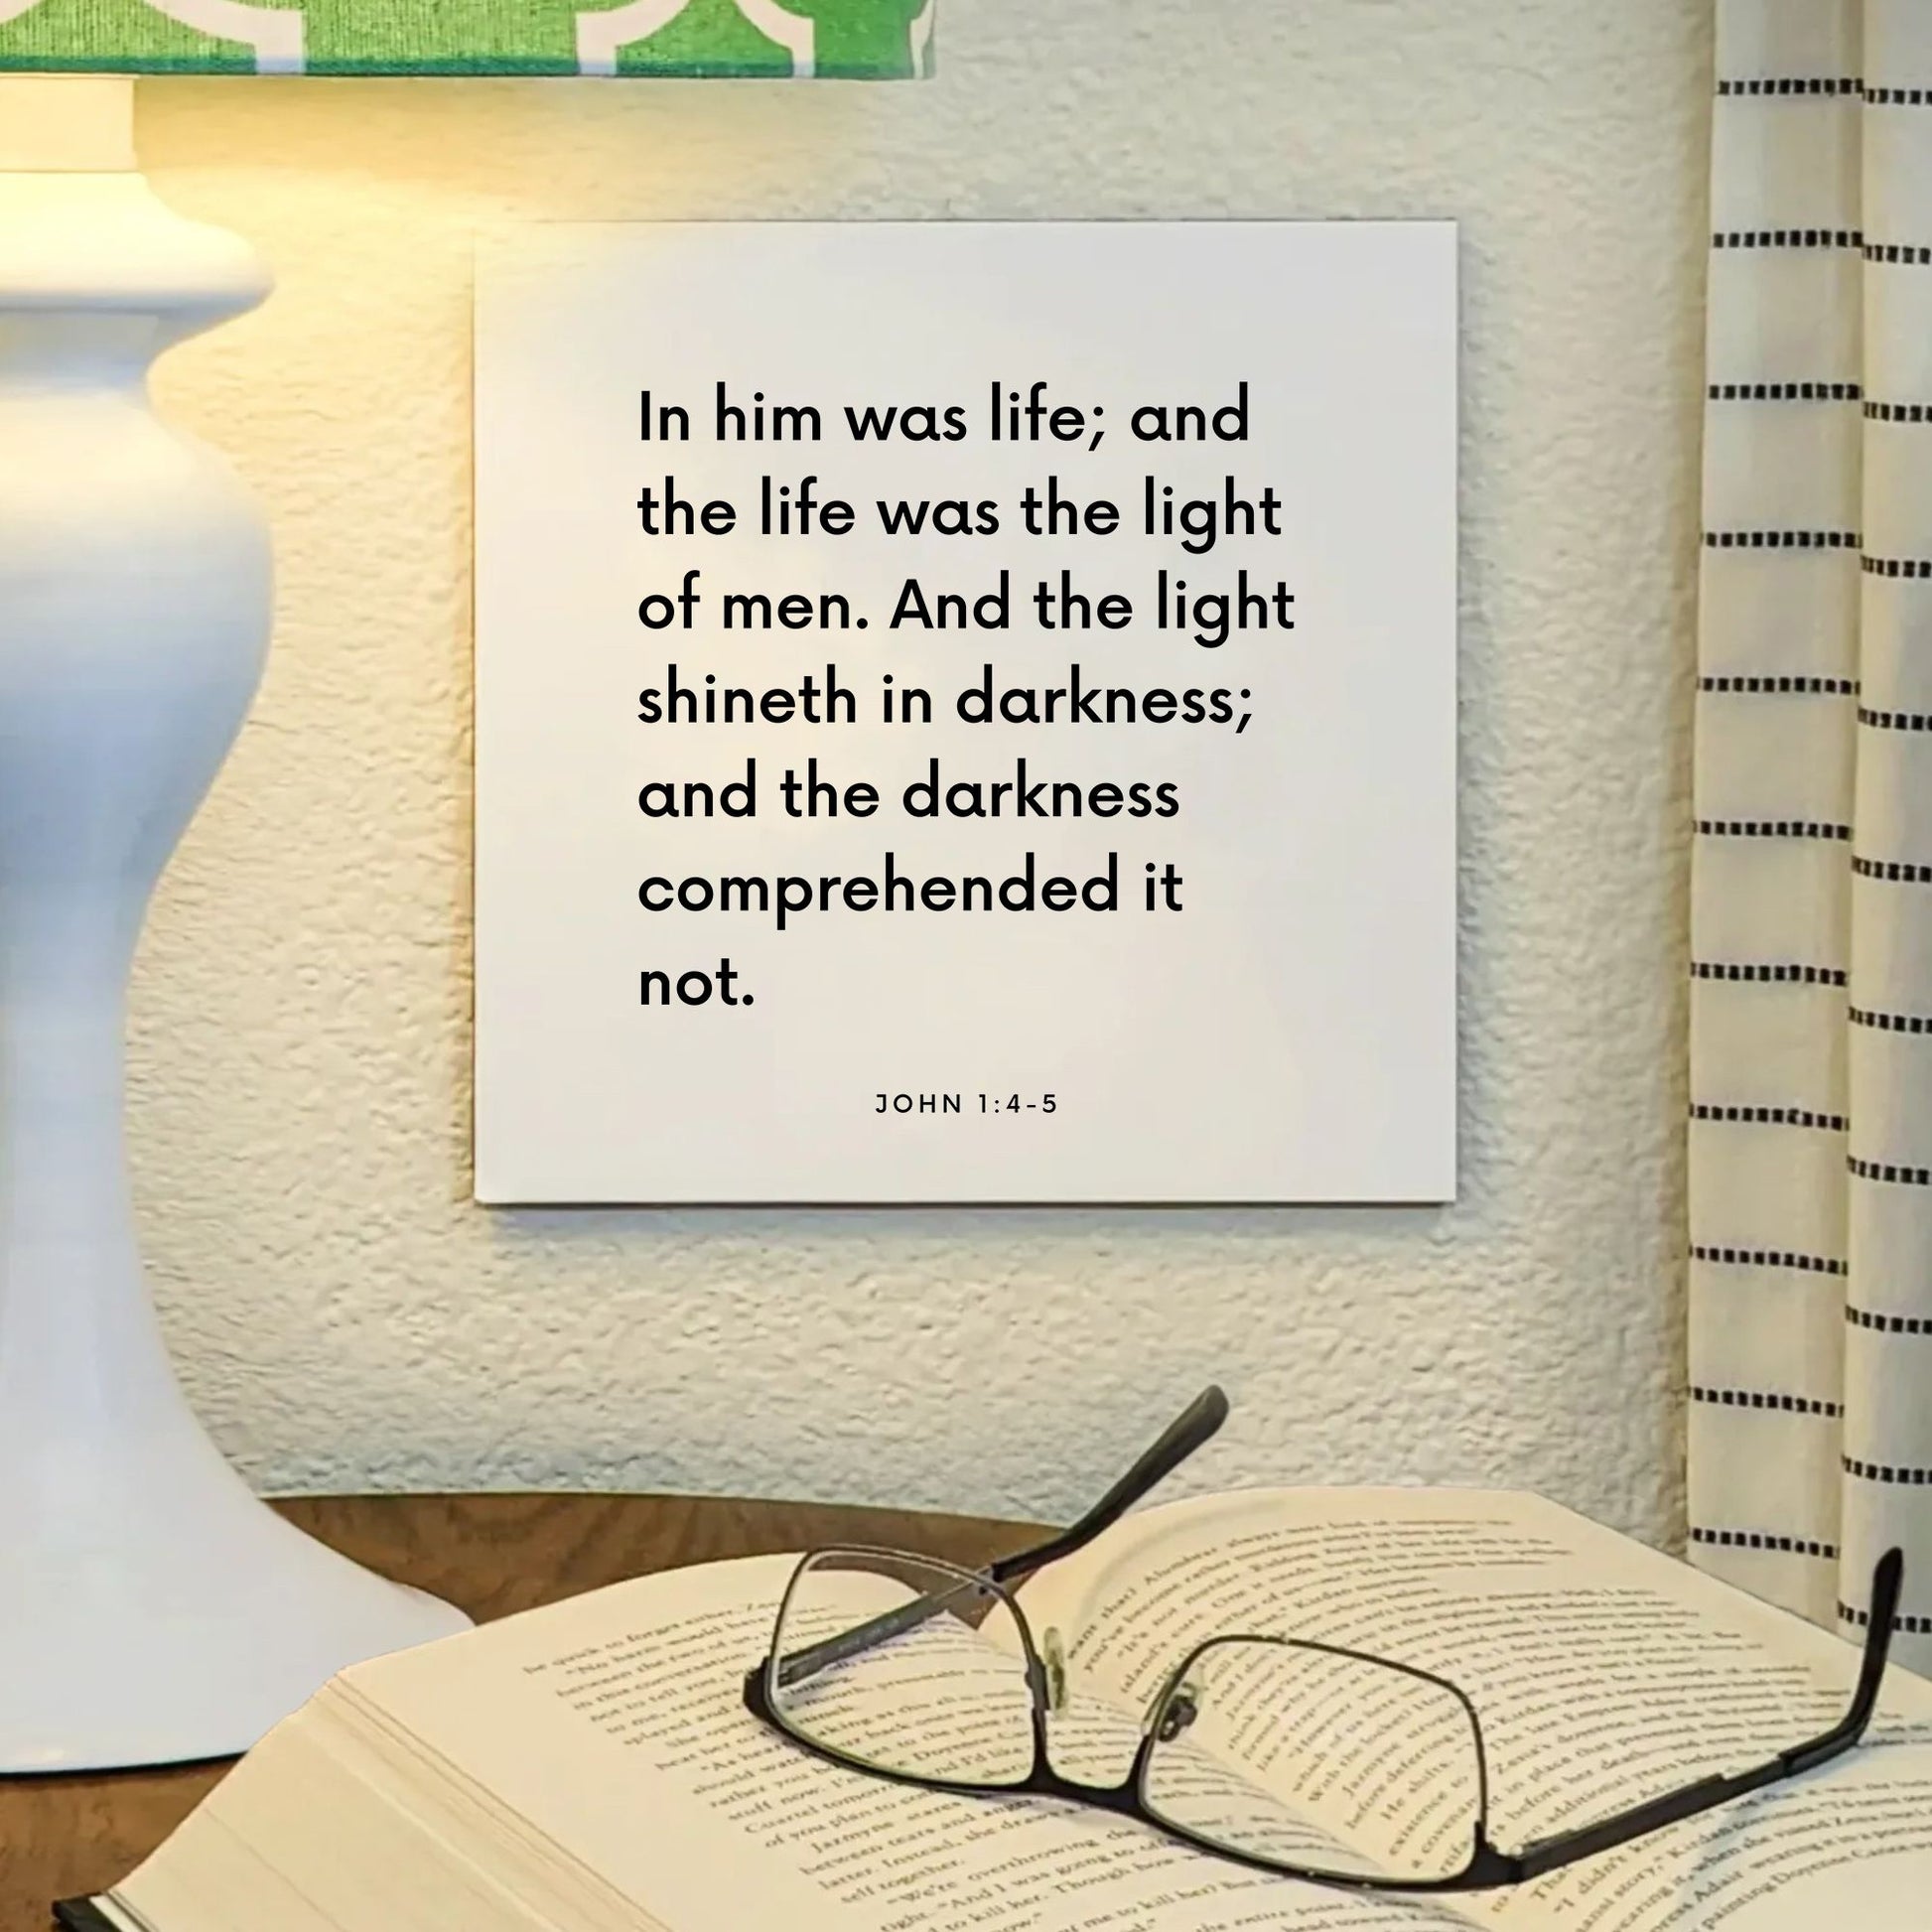 Lamp mouting of the scripture tile for John 1:4-5 - "In him was life; and the life was the light of men"